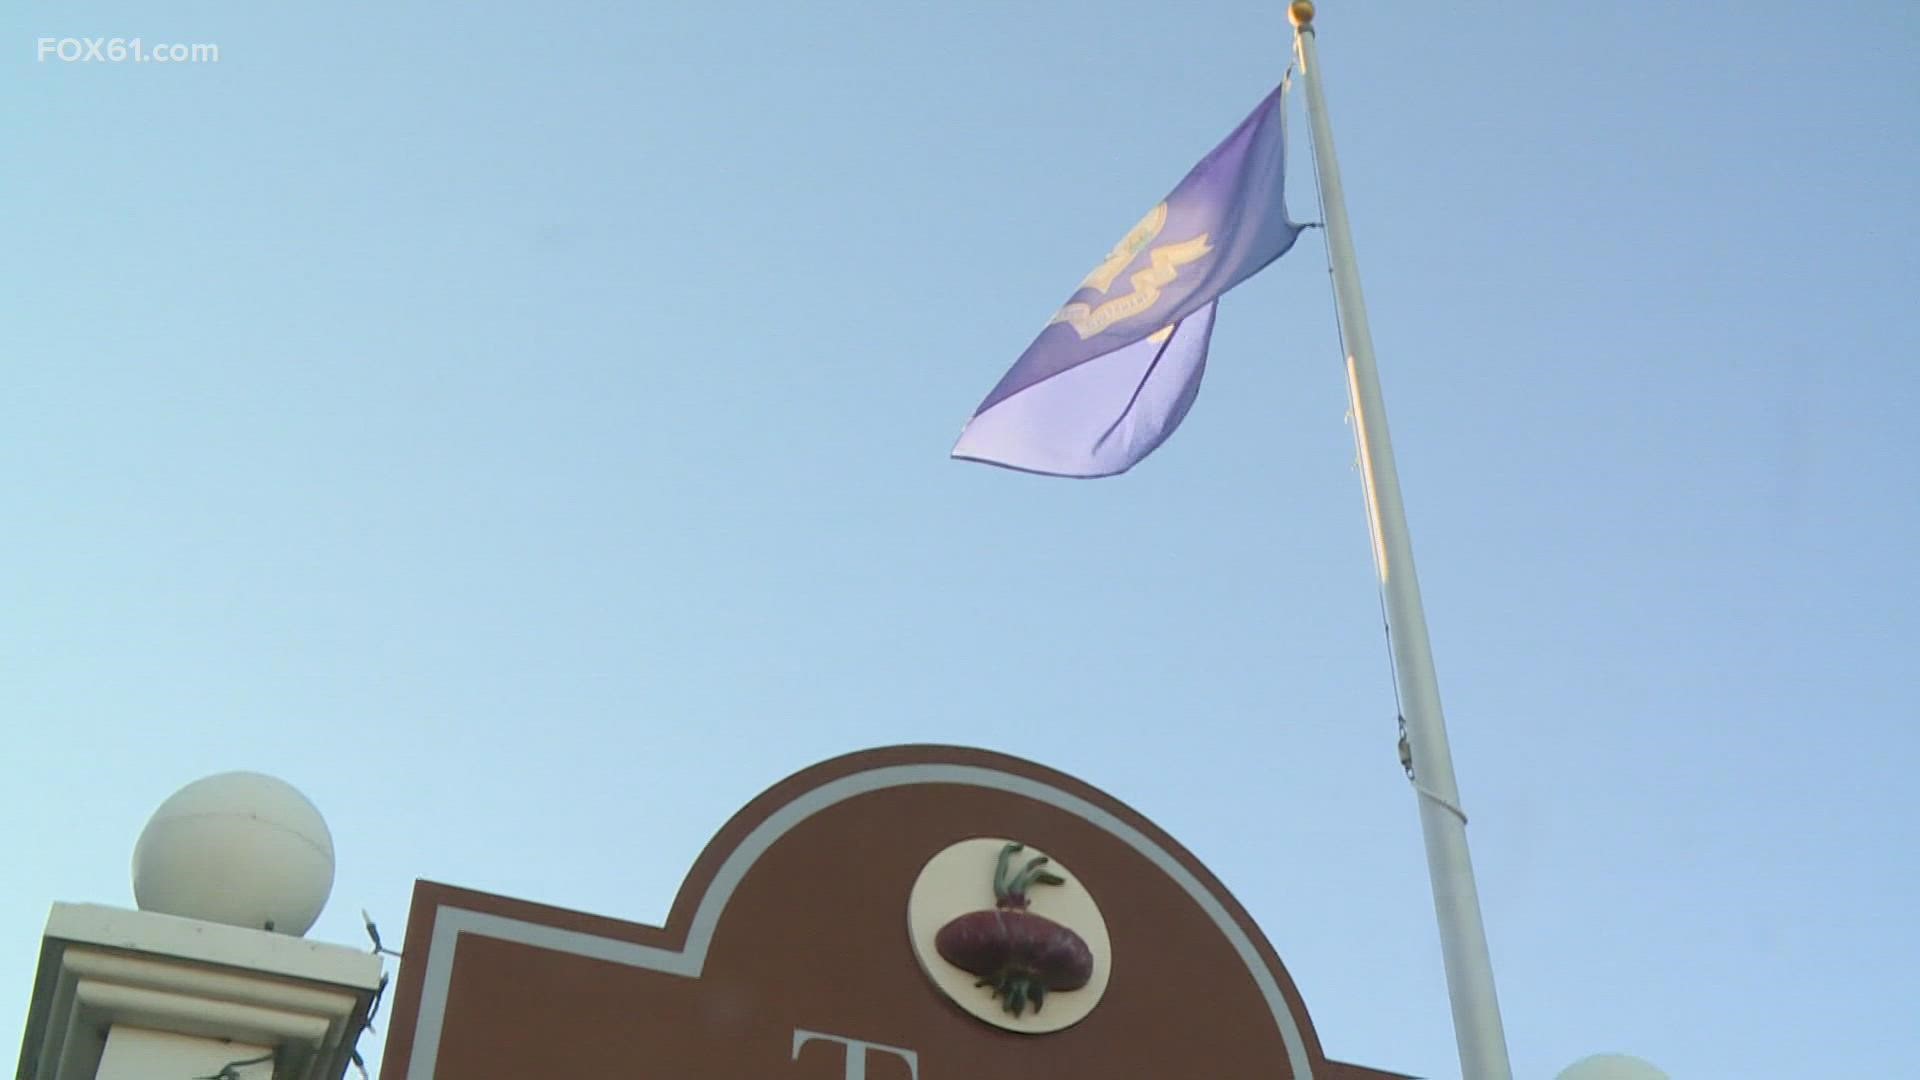 The Wethersfield town council is looking into how to address what flags should be allowed to be flown on town property.